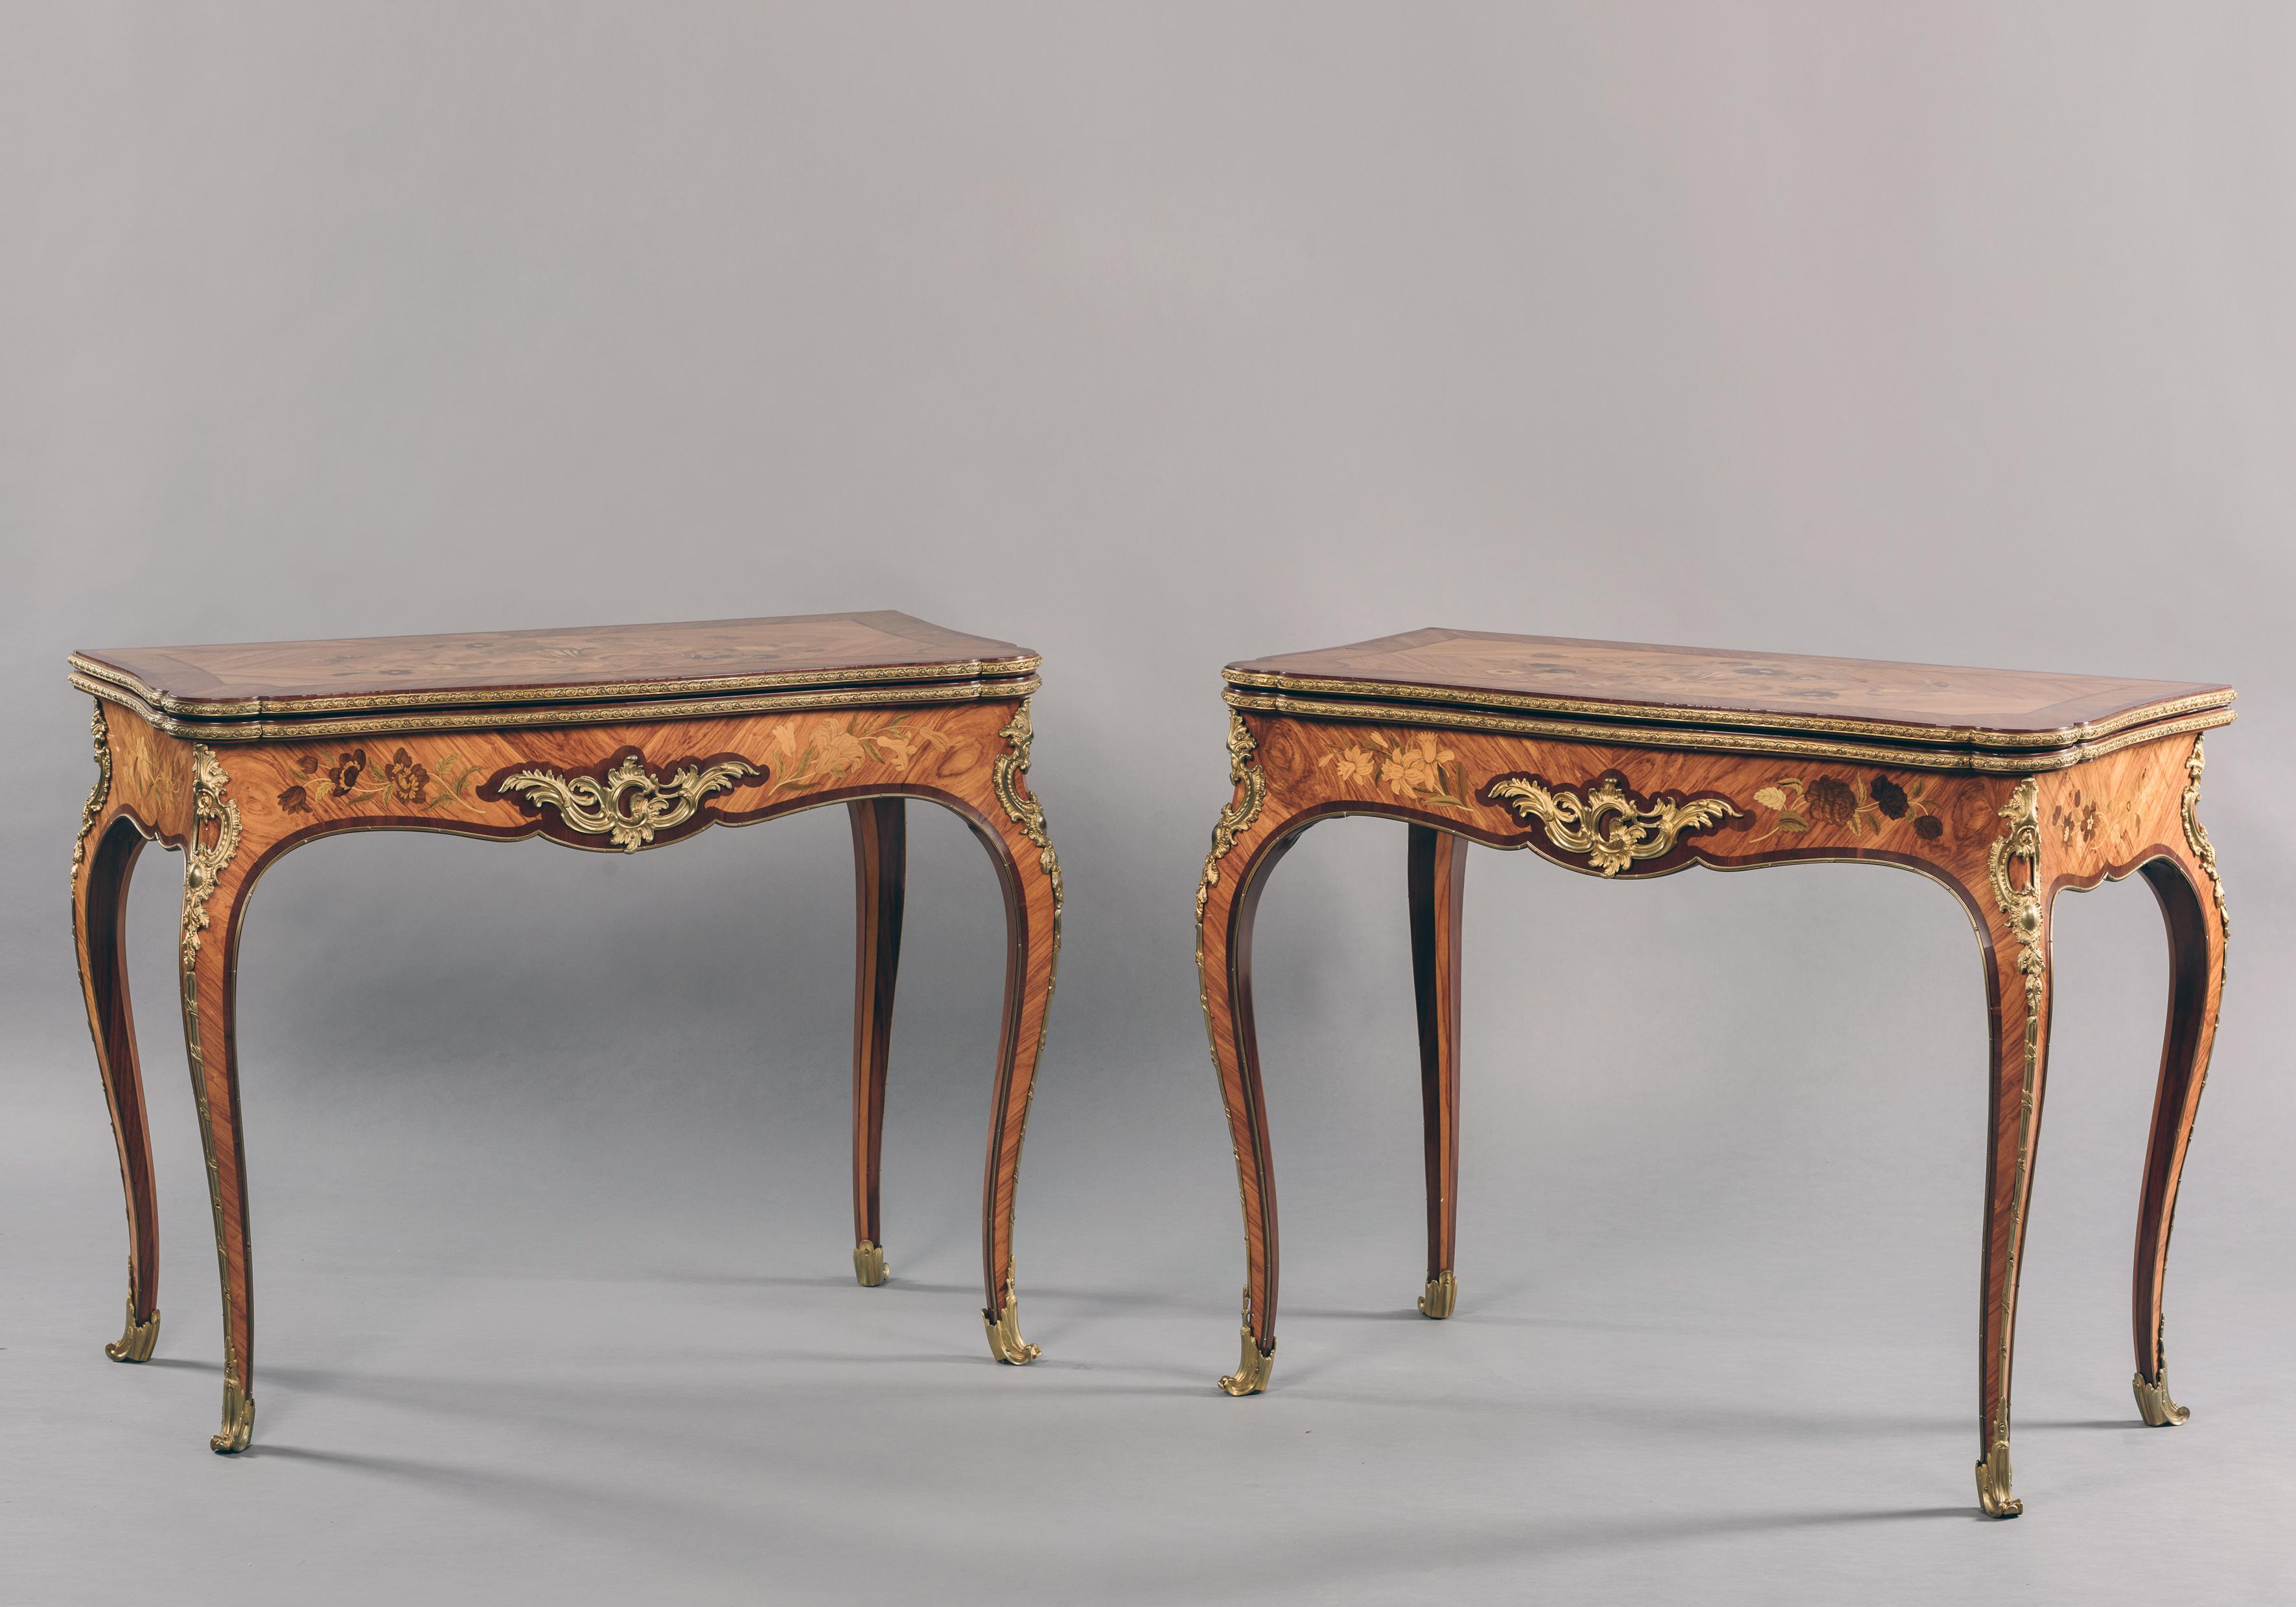 A fine pair of Louis XV style gilt bronze mounted marquetry inlaid card tables.

French, circa 1880.

Each table has a serpentine-shaped fold over top finely inlaid with marquetry depicting cornucopia and a vase issuing flowers, the top opens to